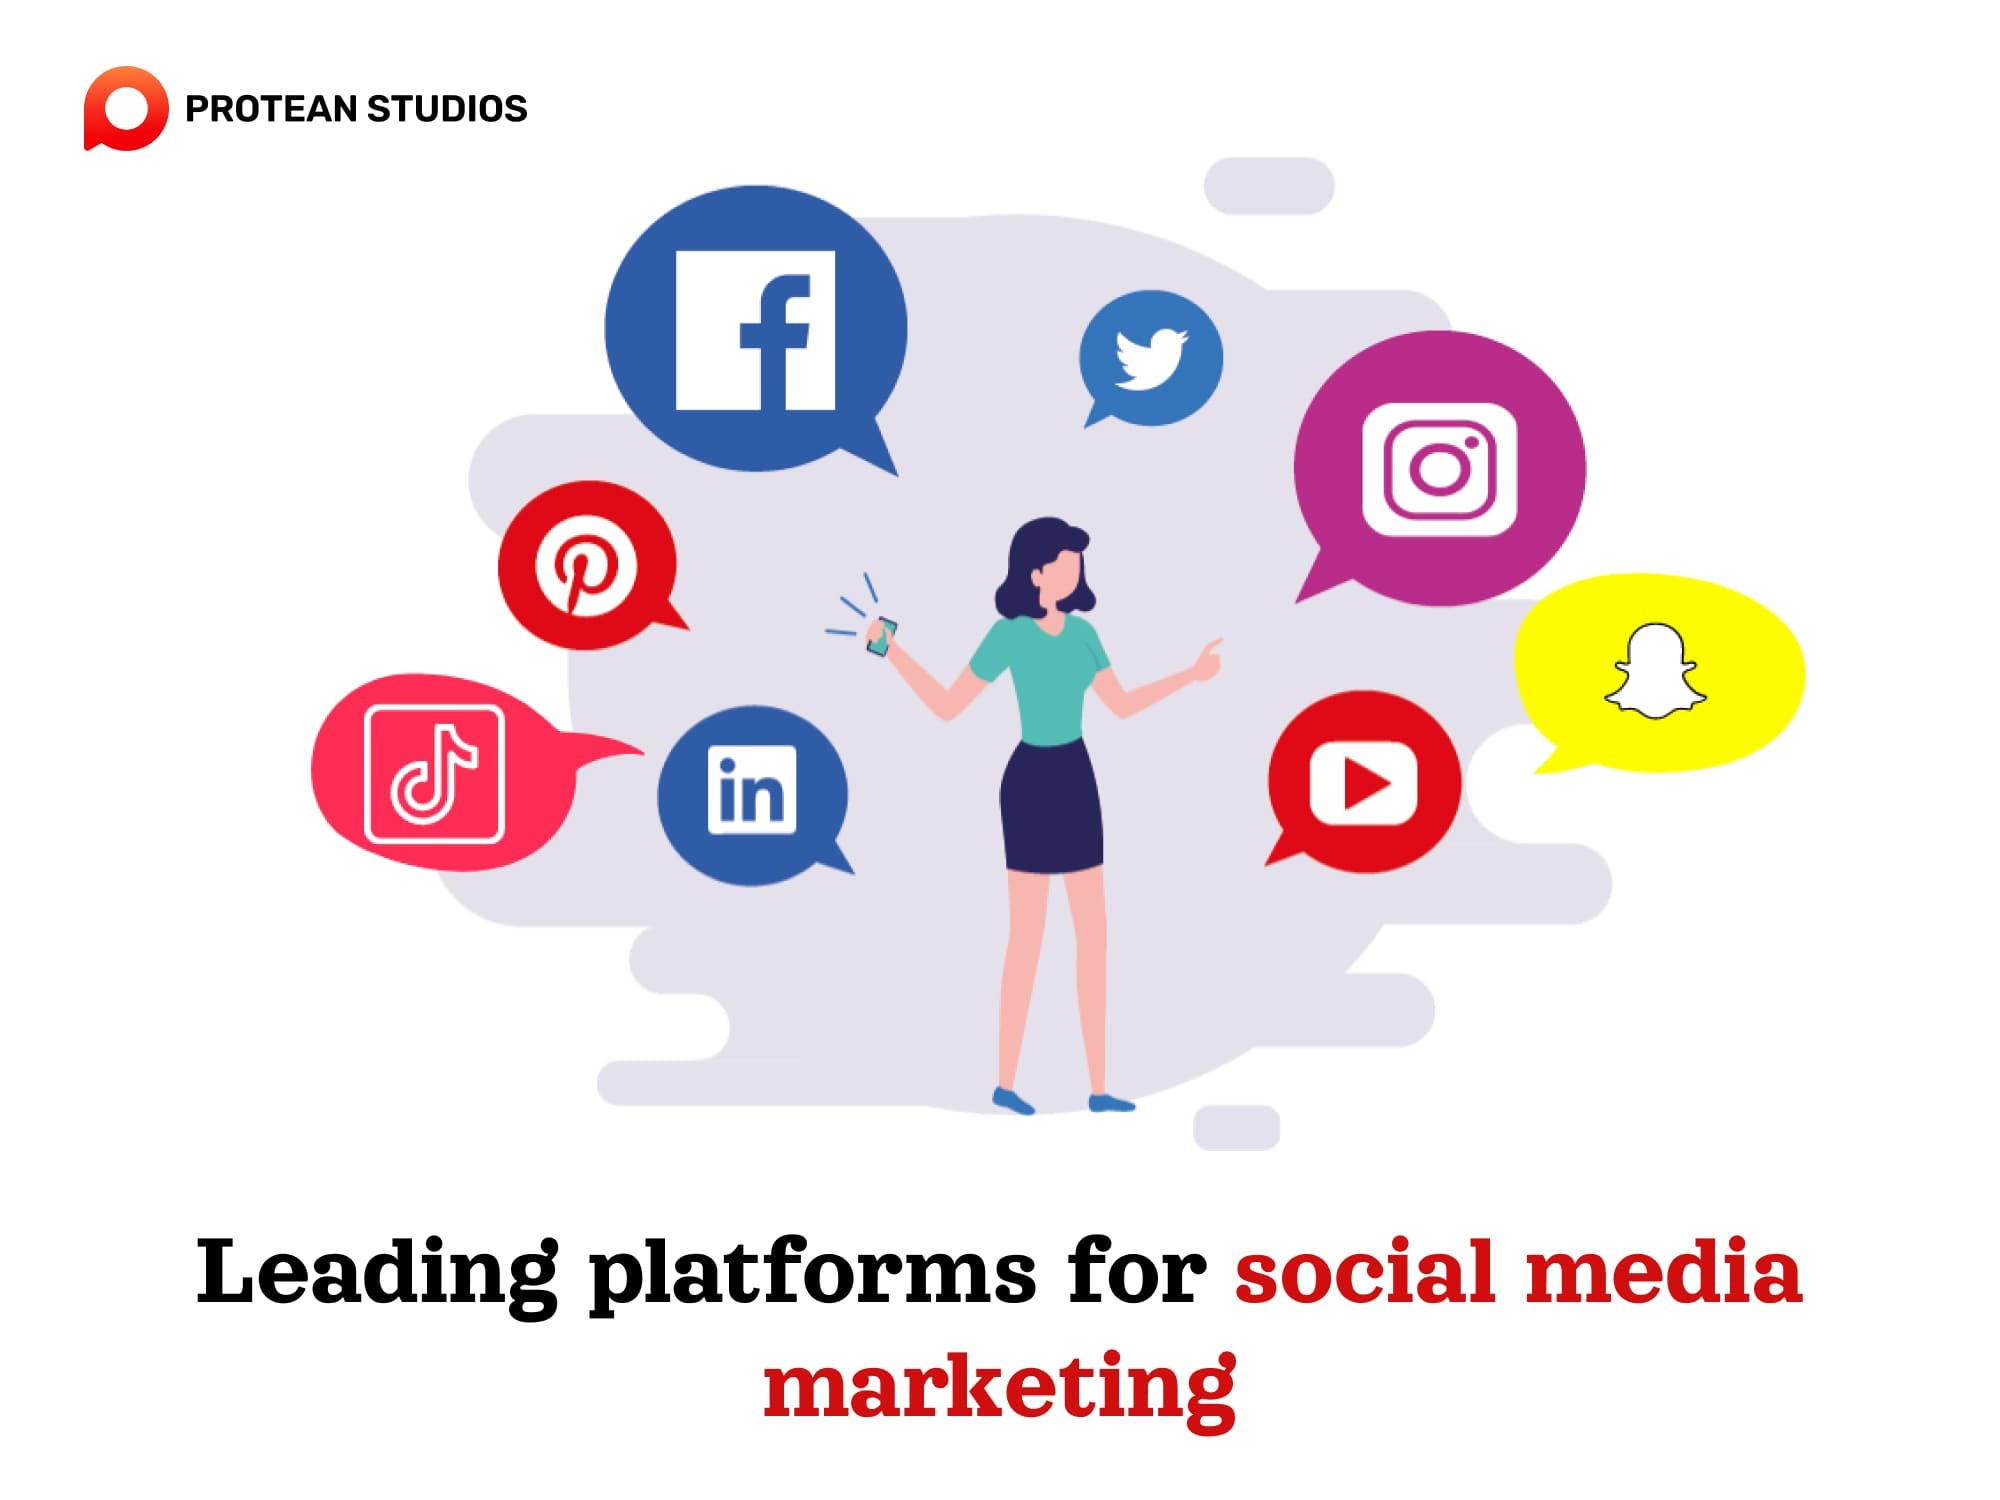 The top ranking of social platforms in the marketing field